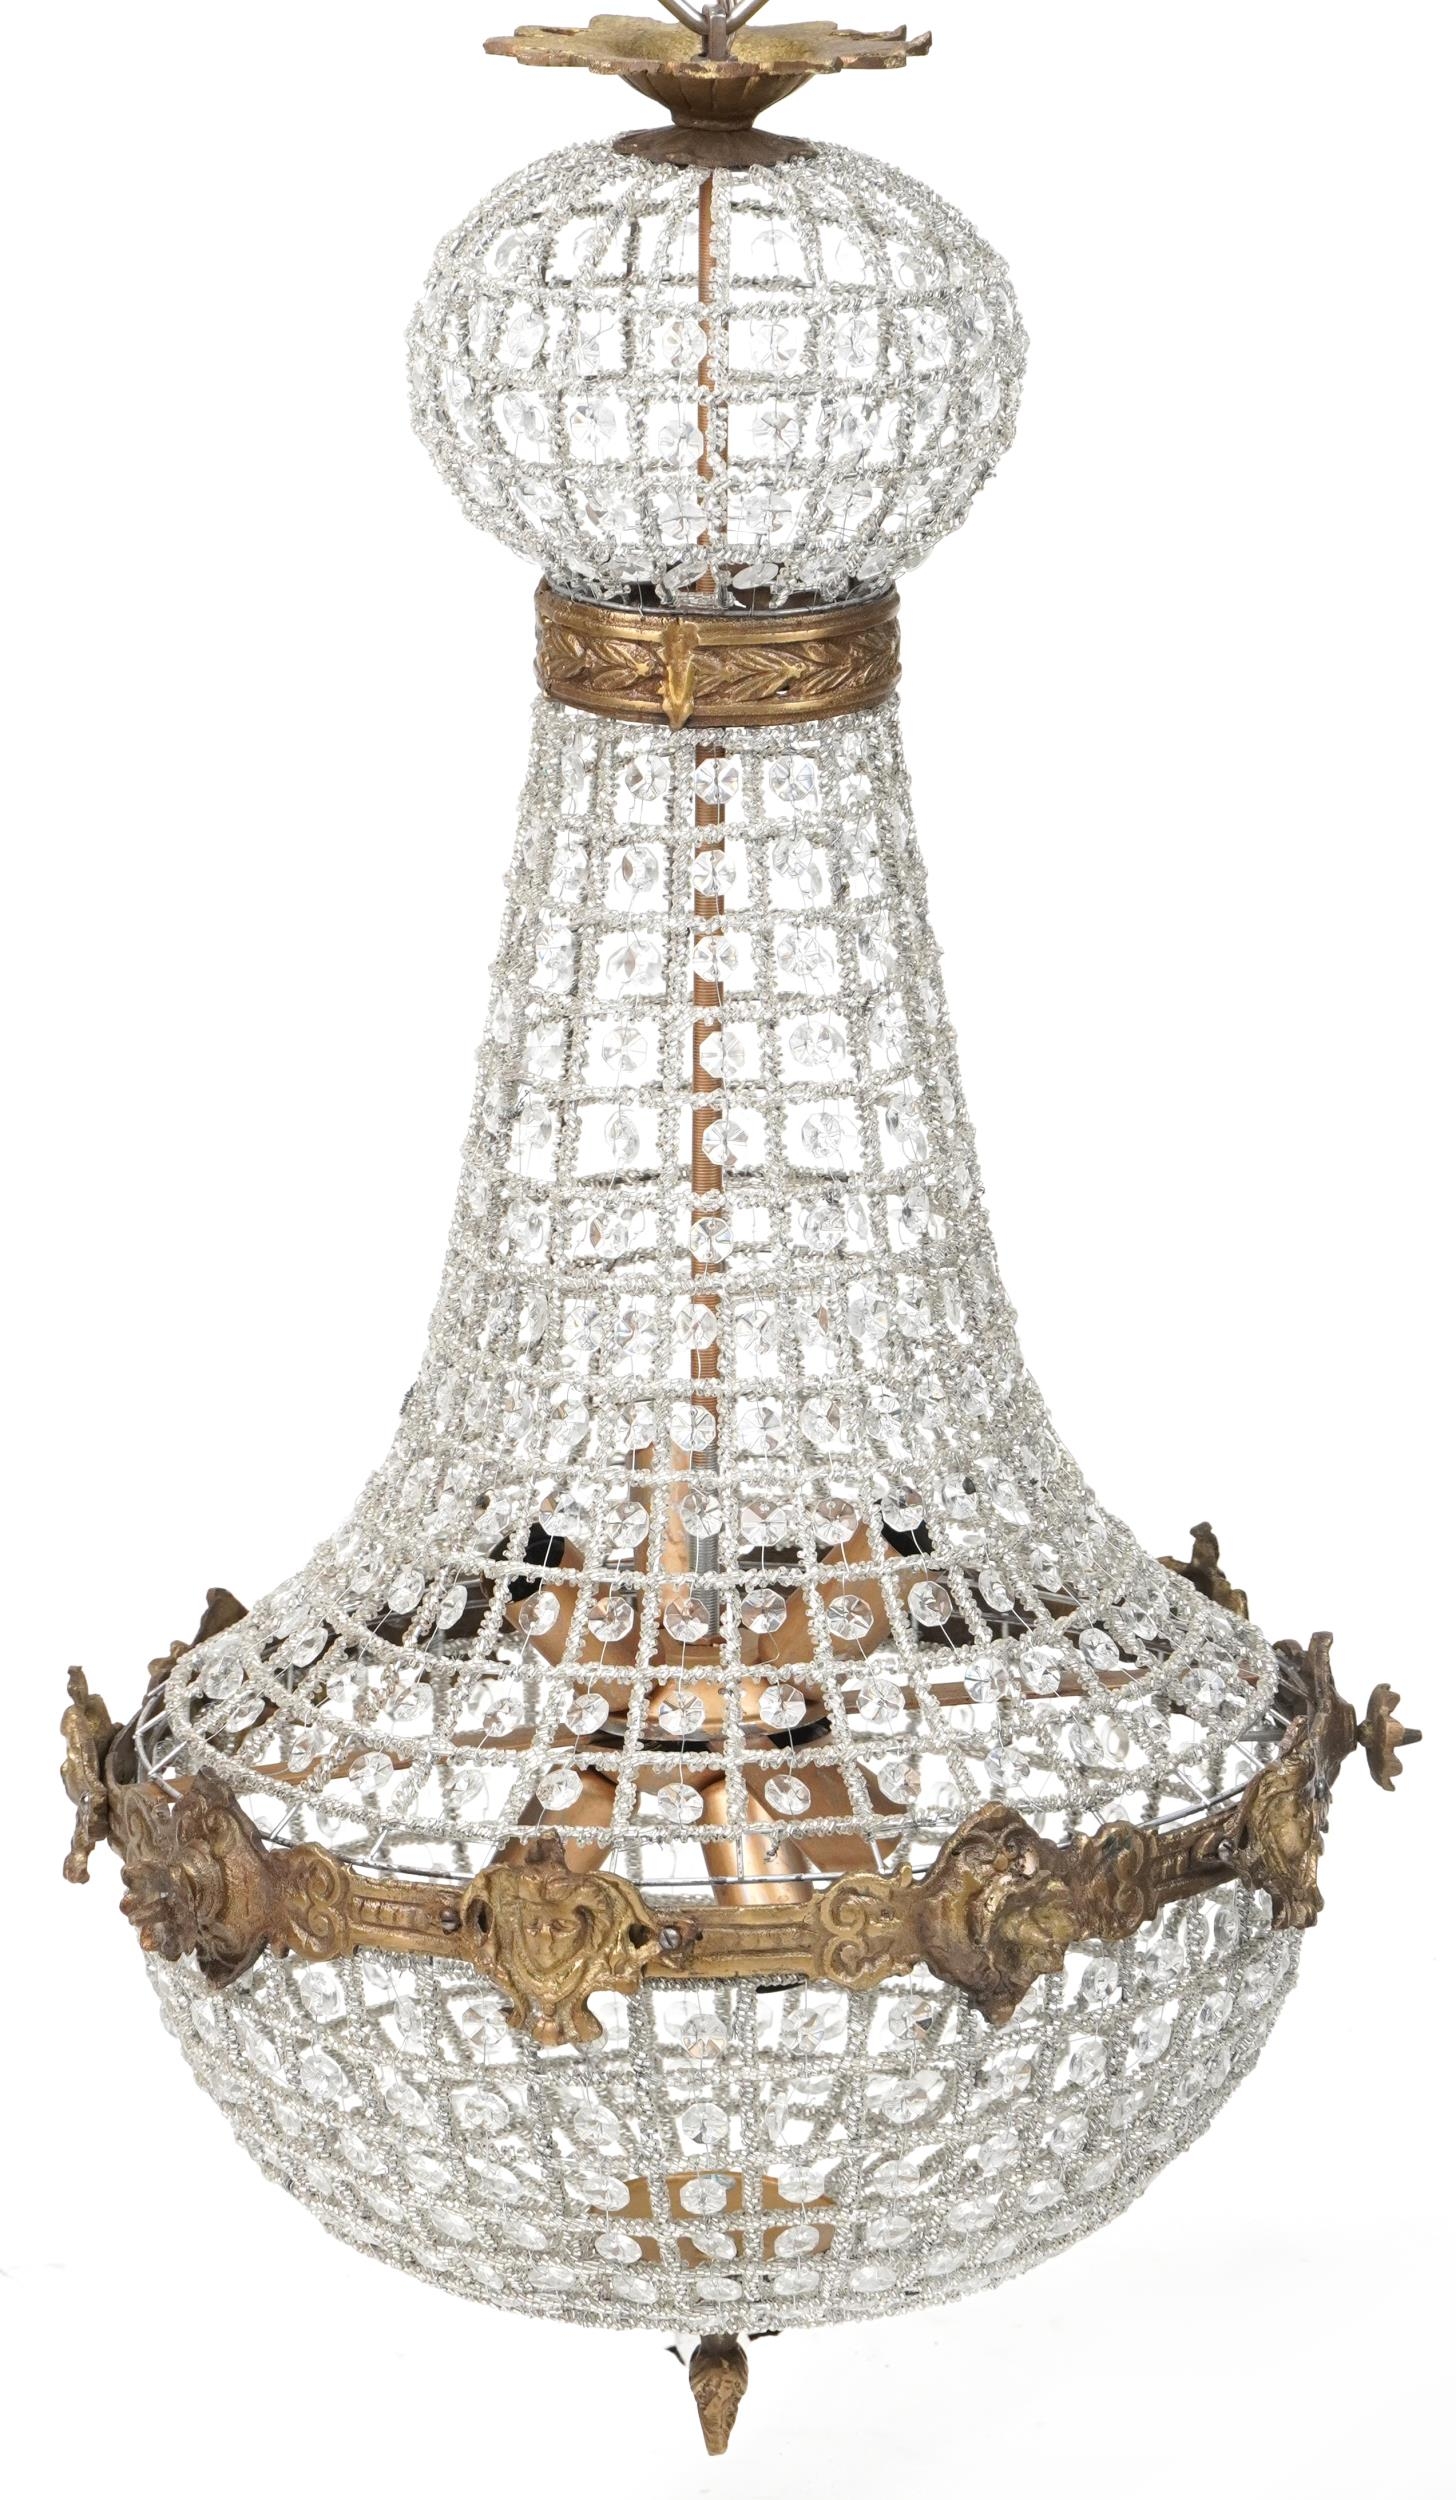 Ornate chandelier with brass mounts, 75cm high - Image 2 of 2